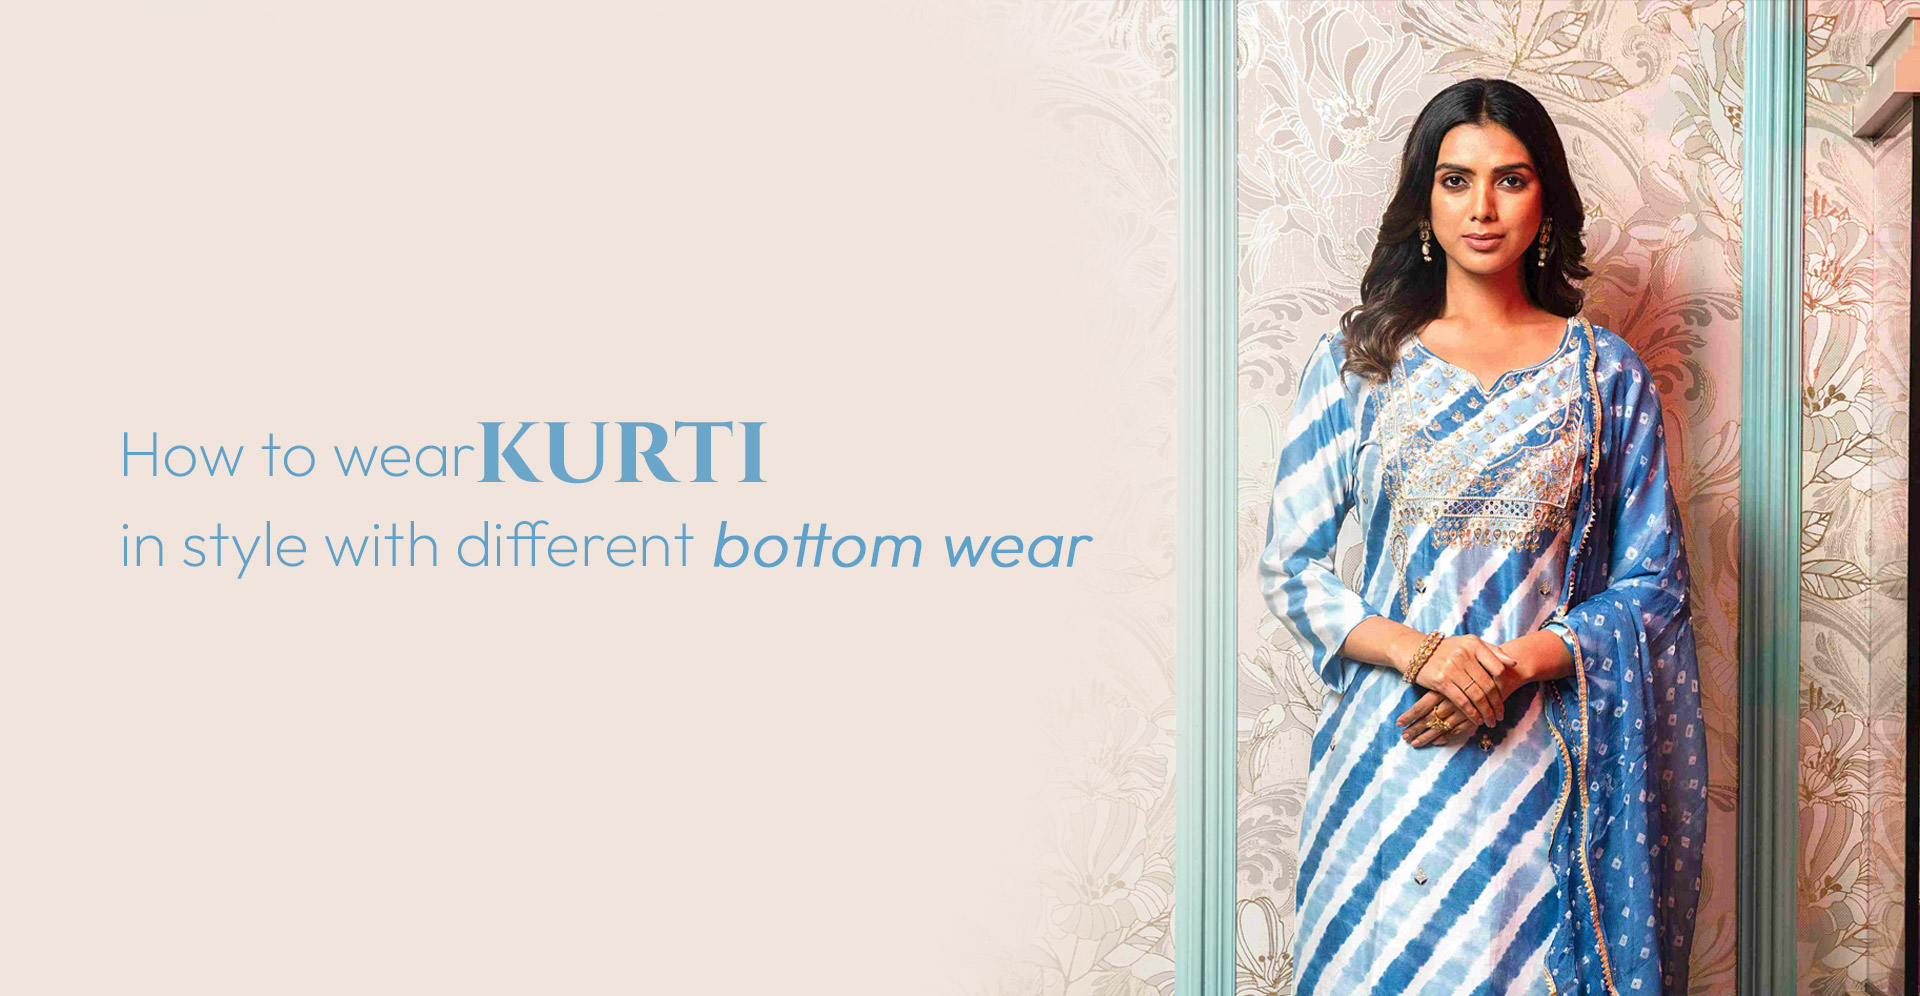 How to wear kurti in style with different bottom wear?